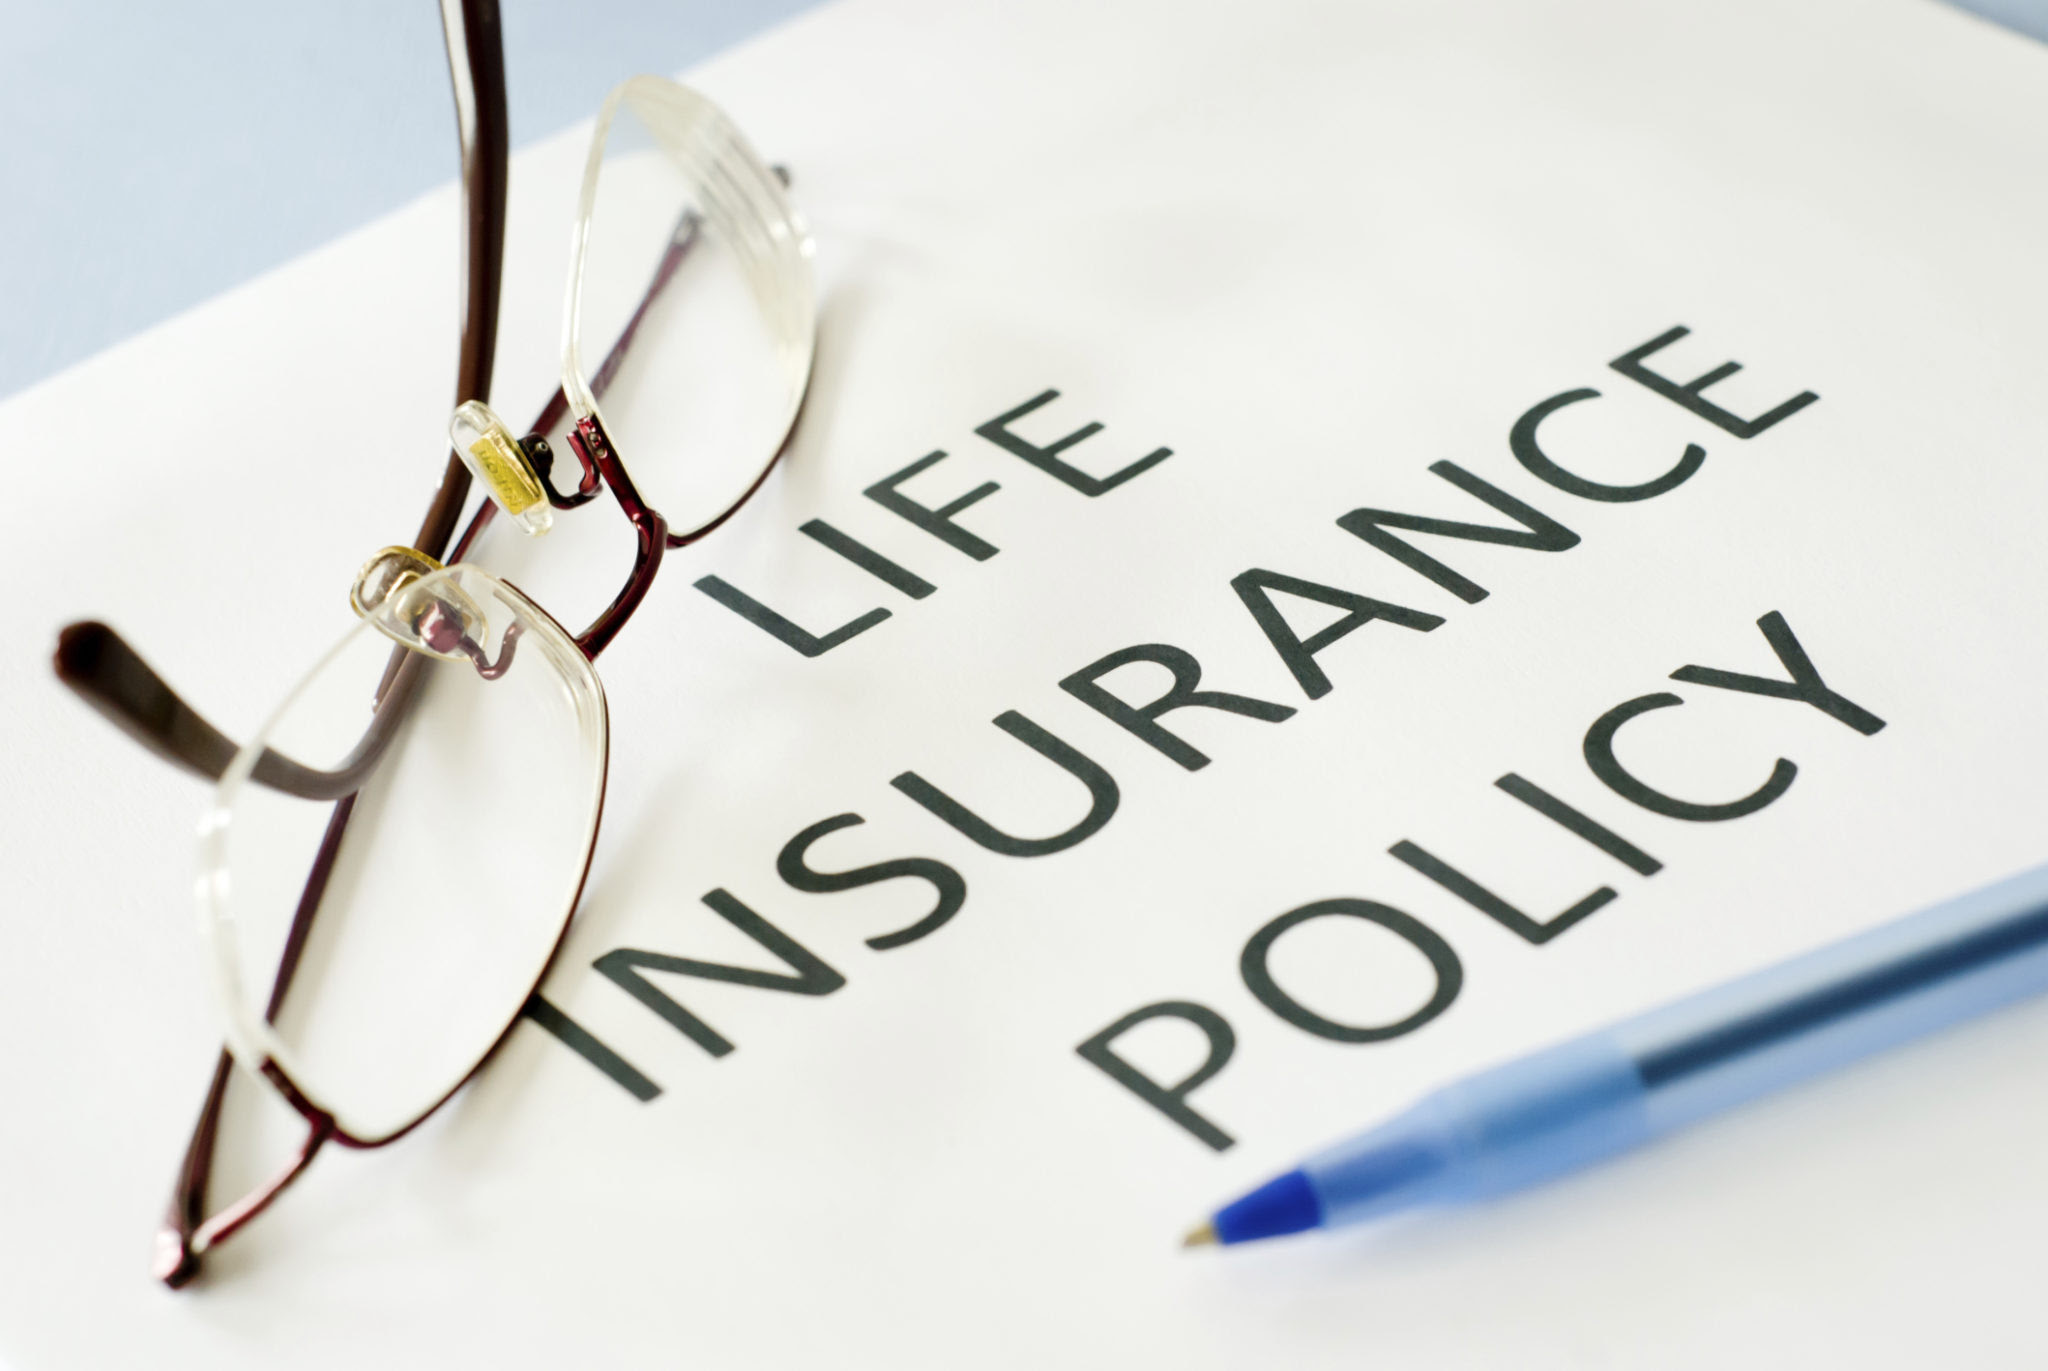 Different Types of Life Insurance Policies